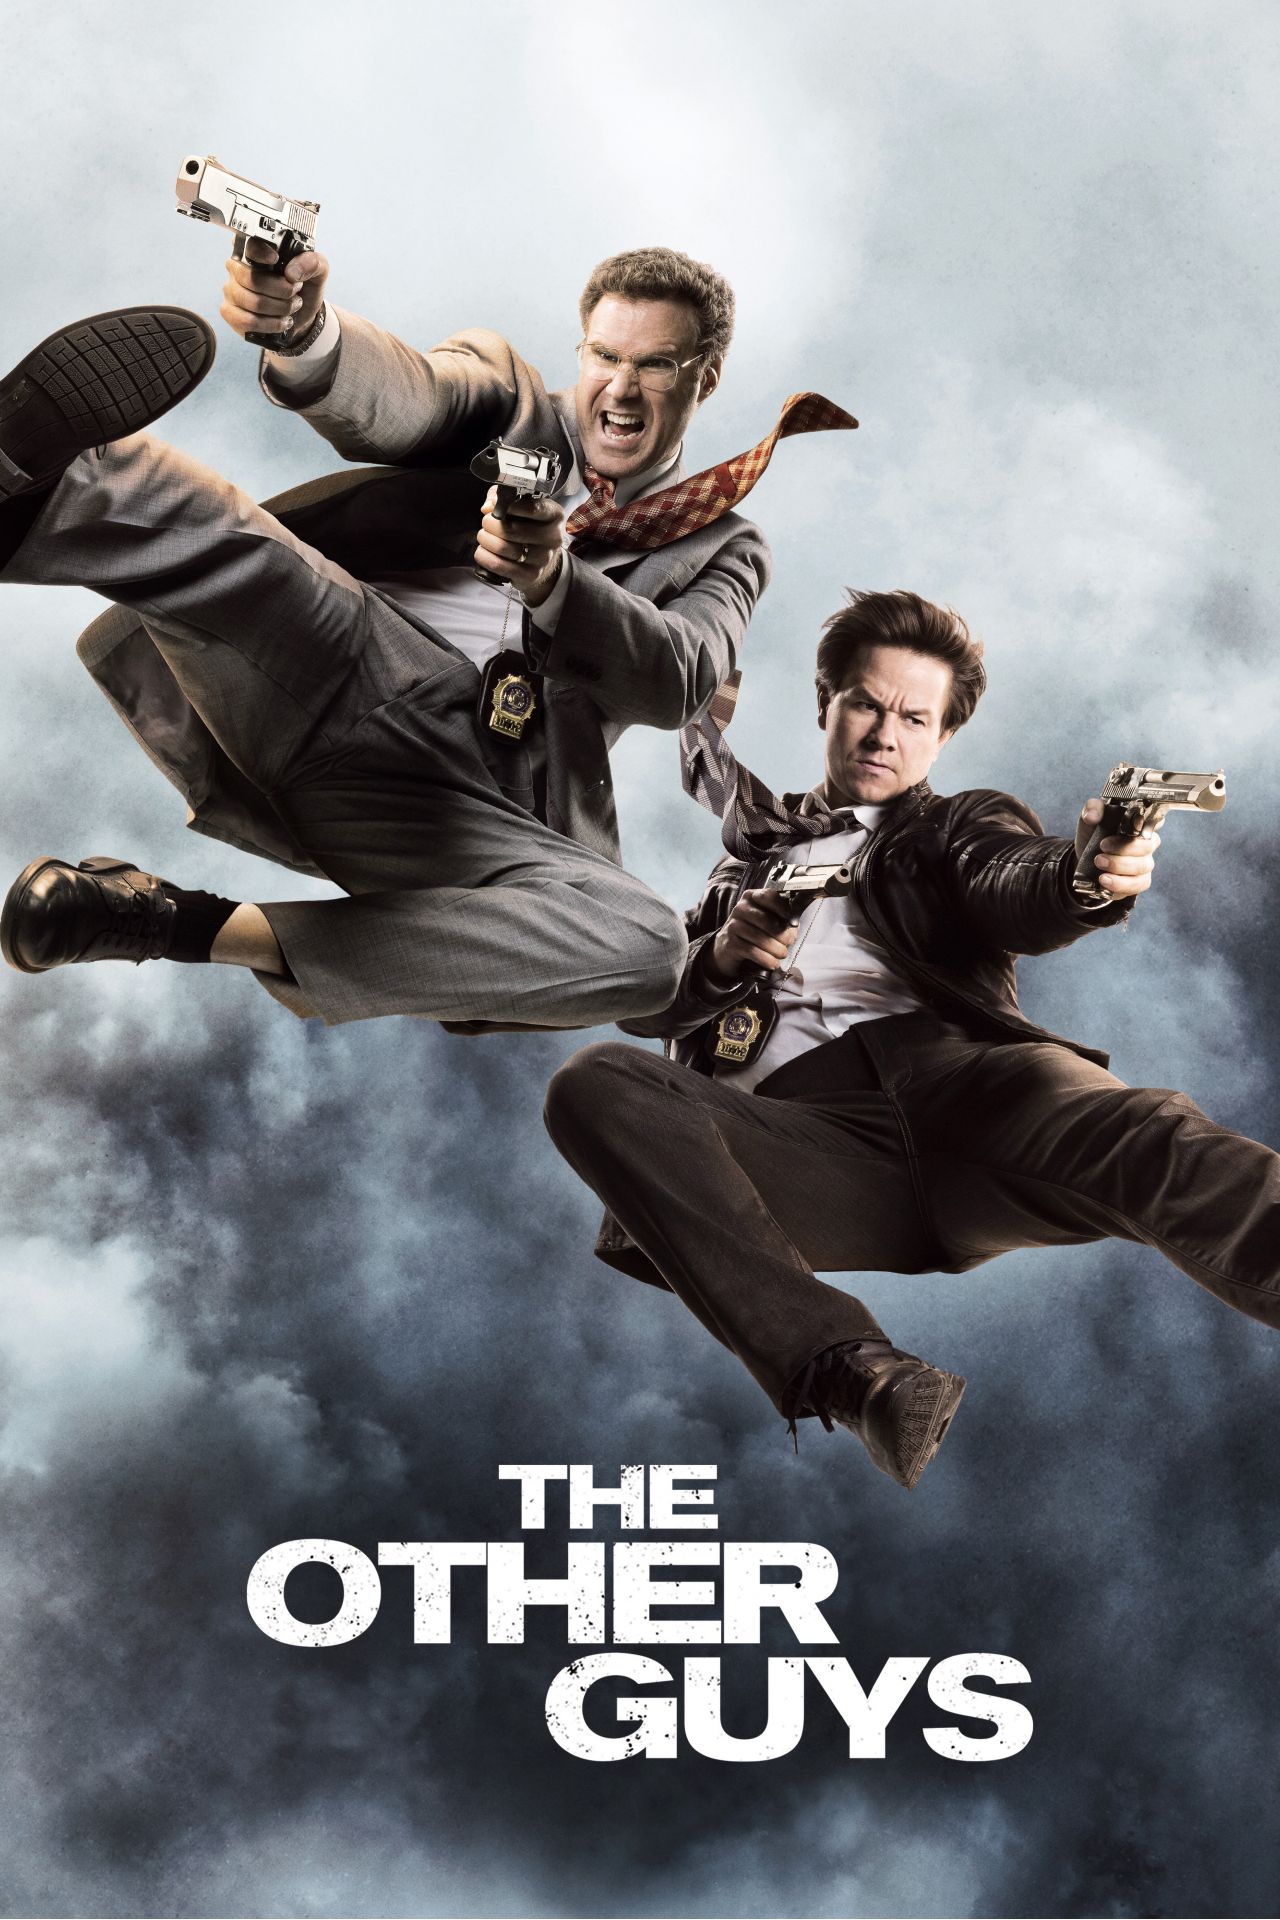 The Other Guys Movie Poster